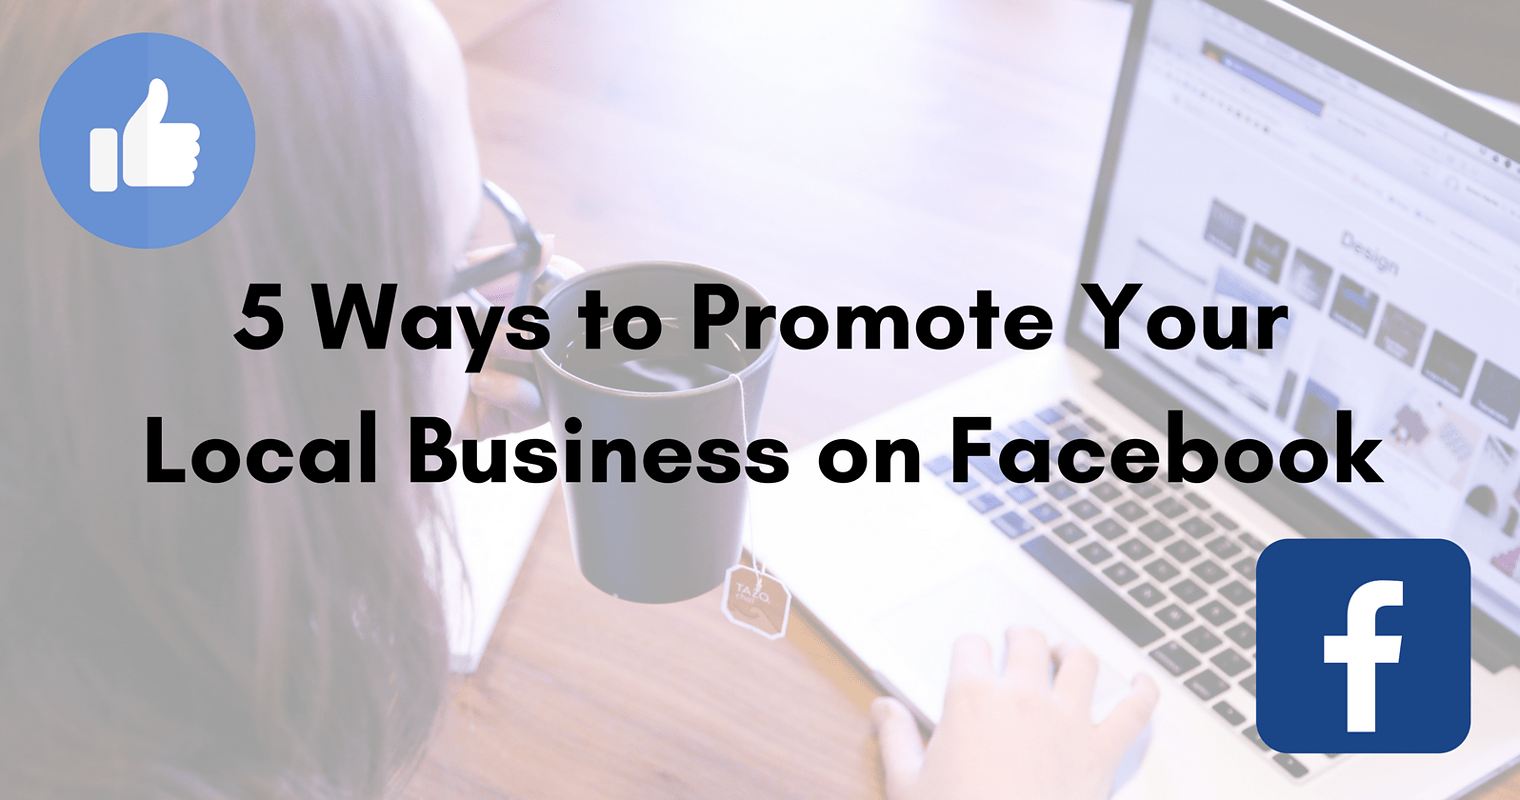 5 Ways to Promote Your Local Business on Facebook